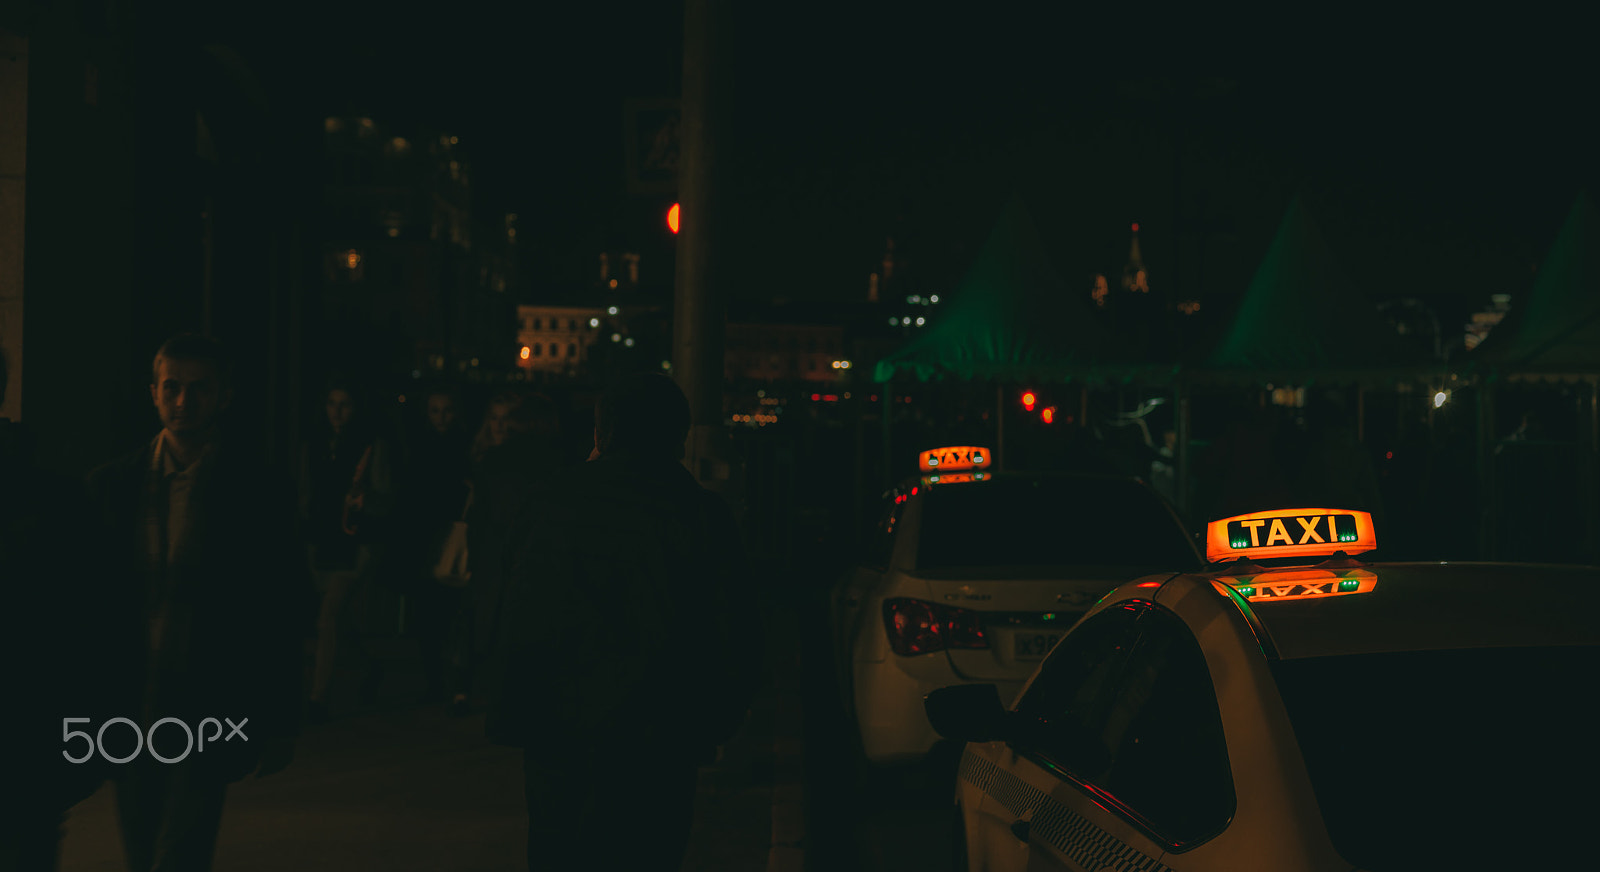 Sony a7R II sample photo. Those night taxis photography